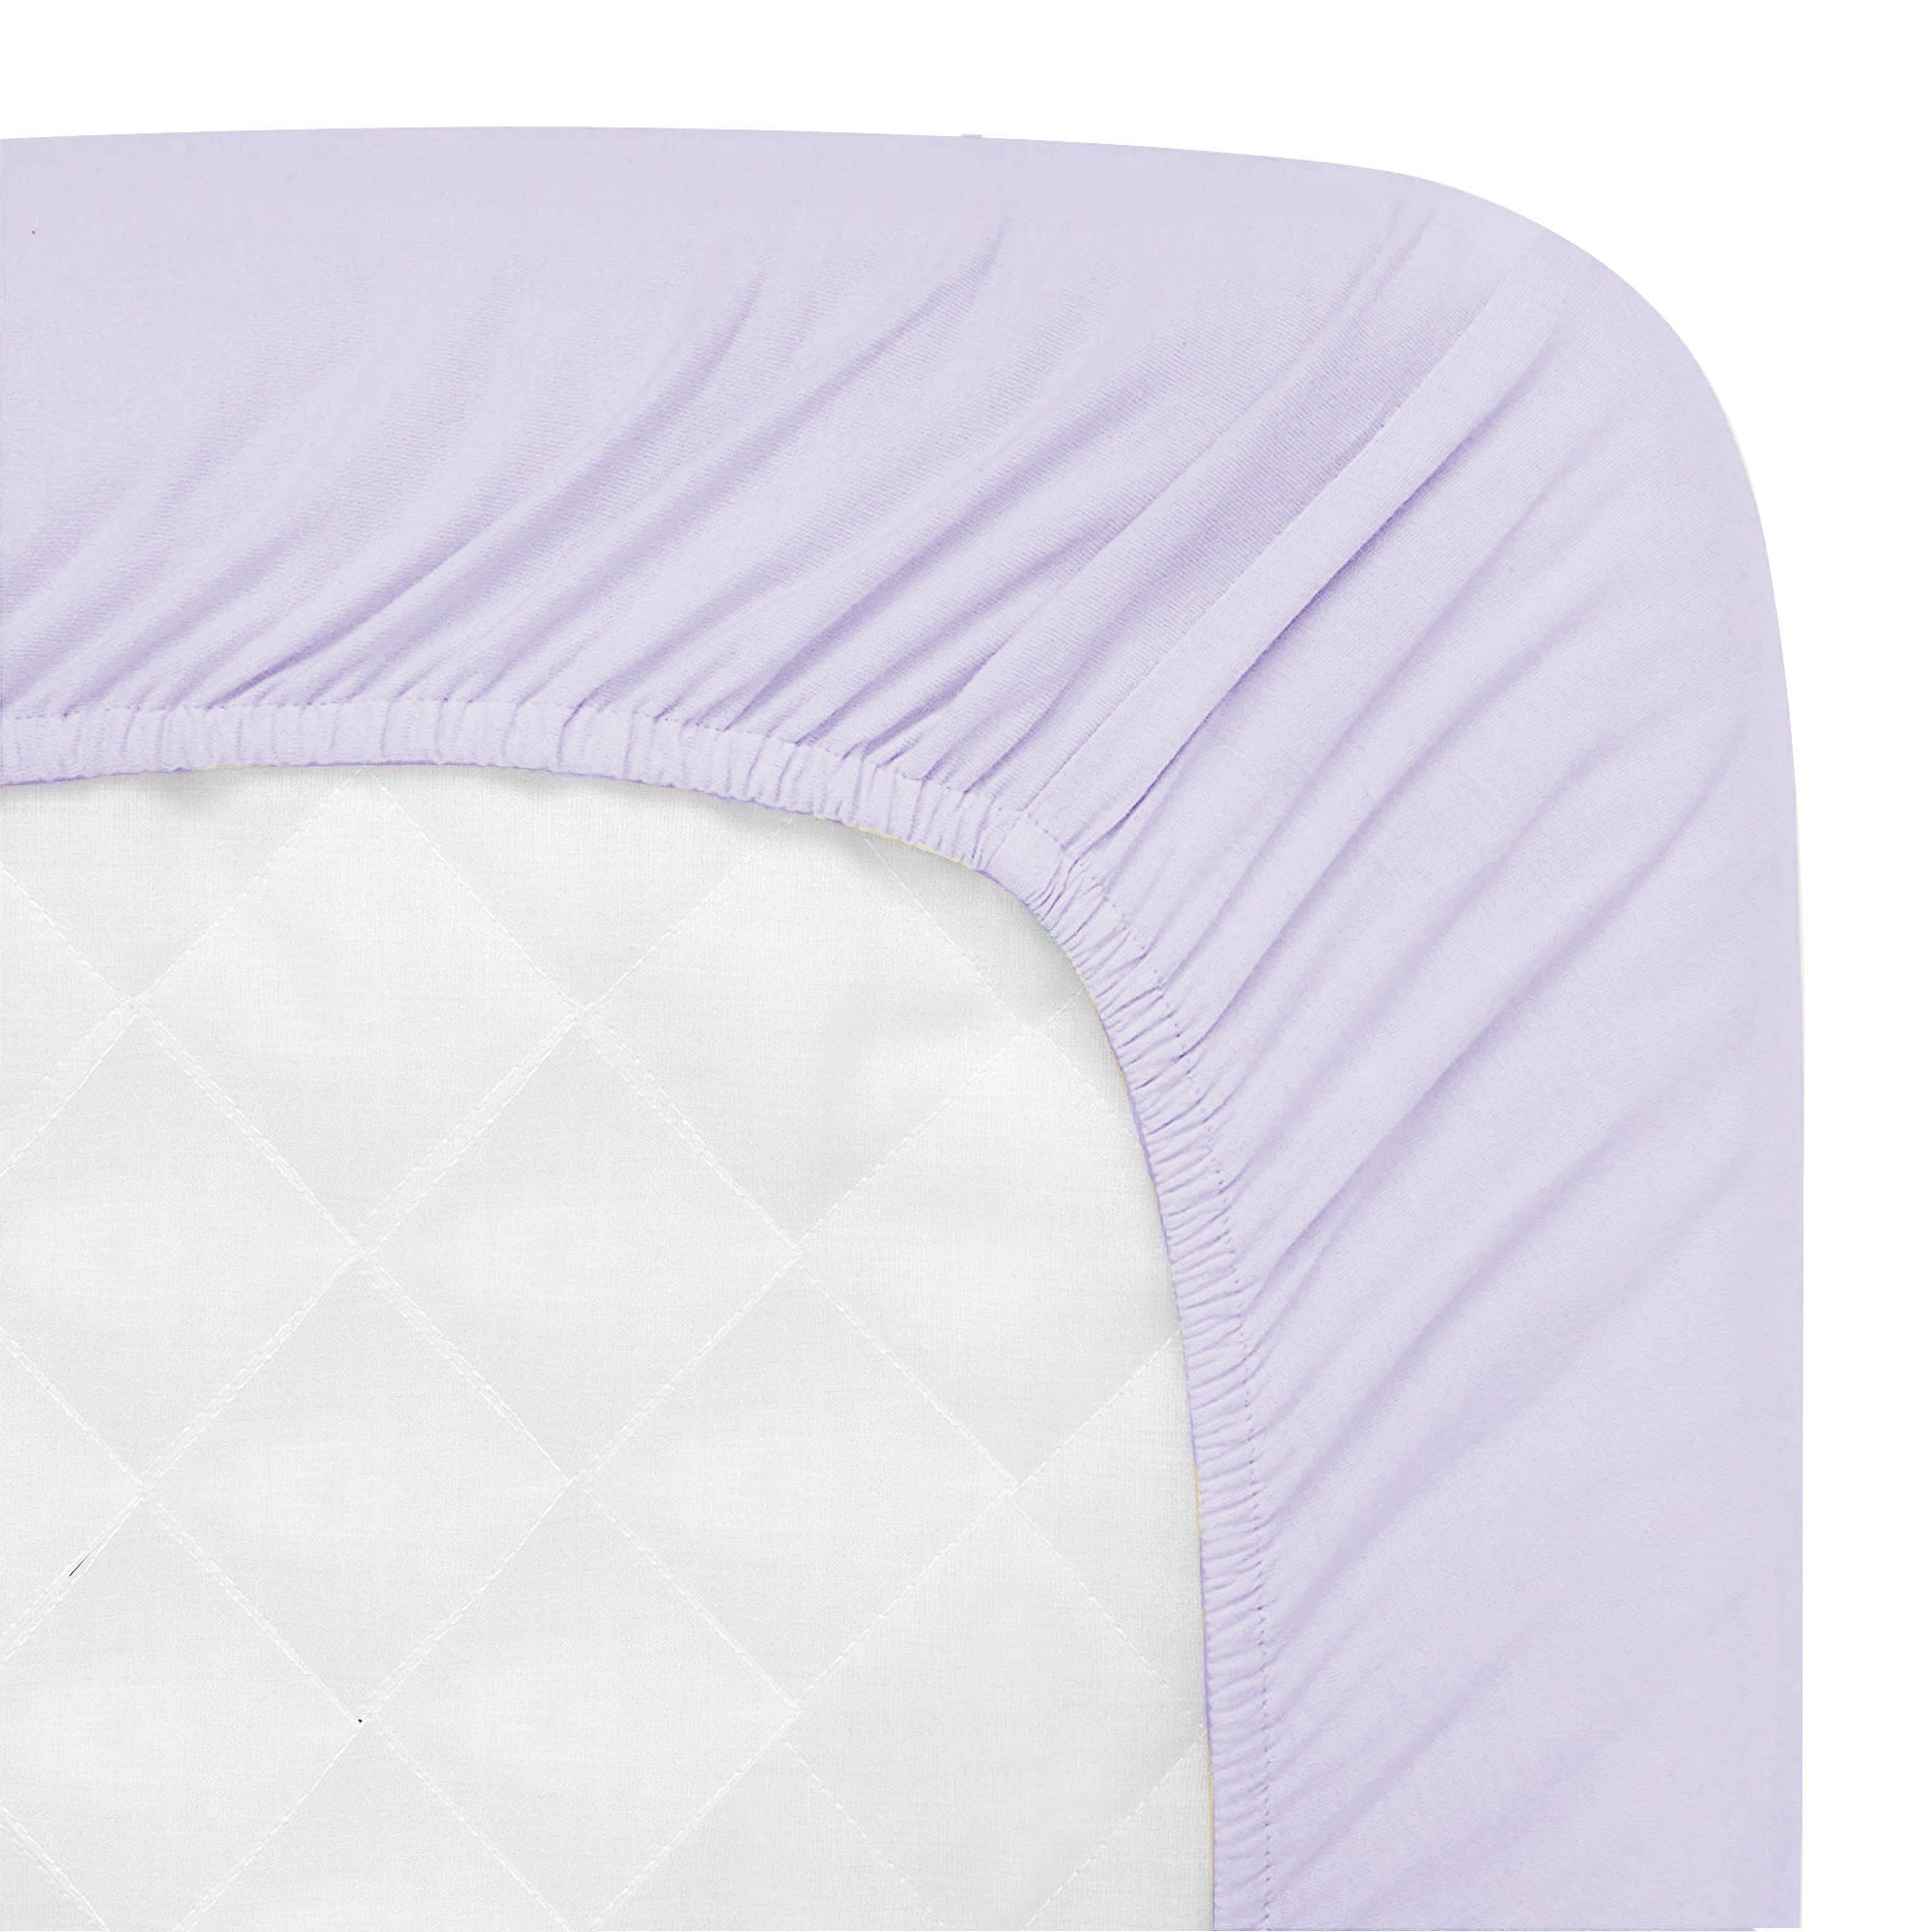 Fitted Crib bed sheets Online India